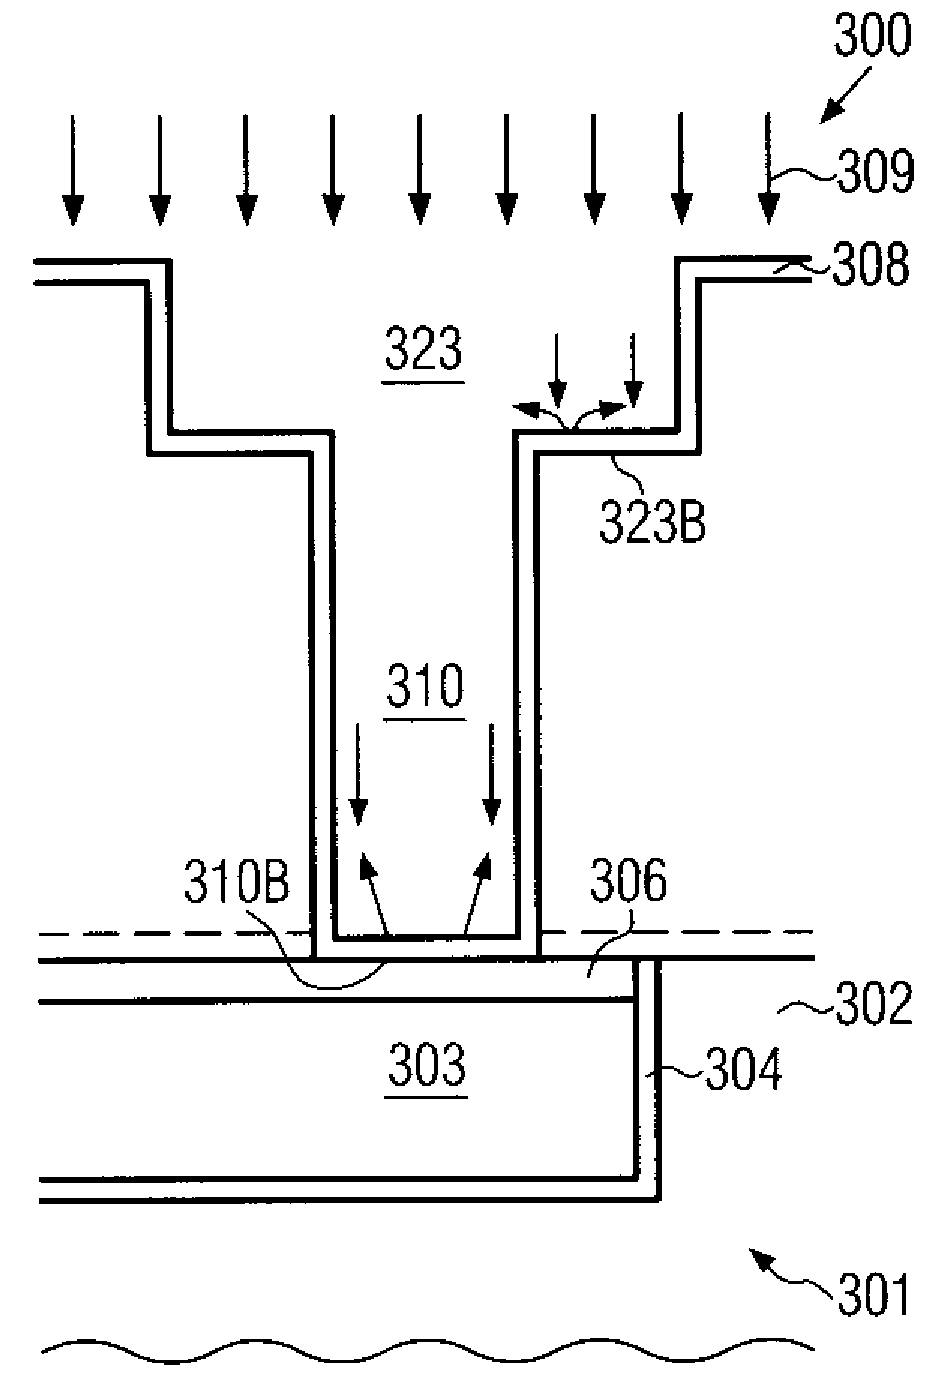 Method of forming a copper-based metallization layer including a conductive cap layer by an advanced integration regime